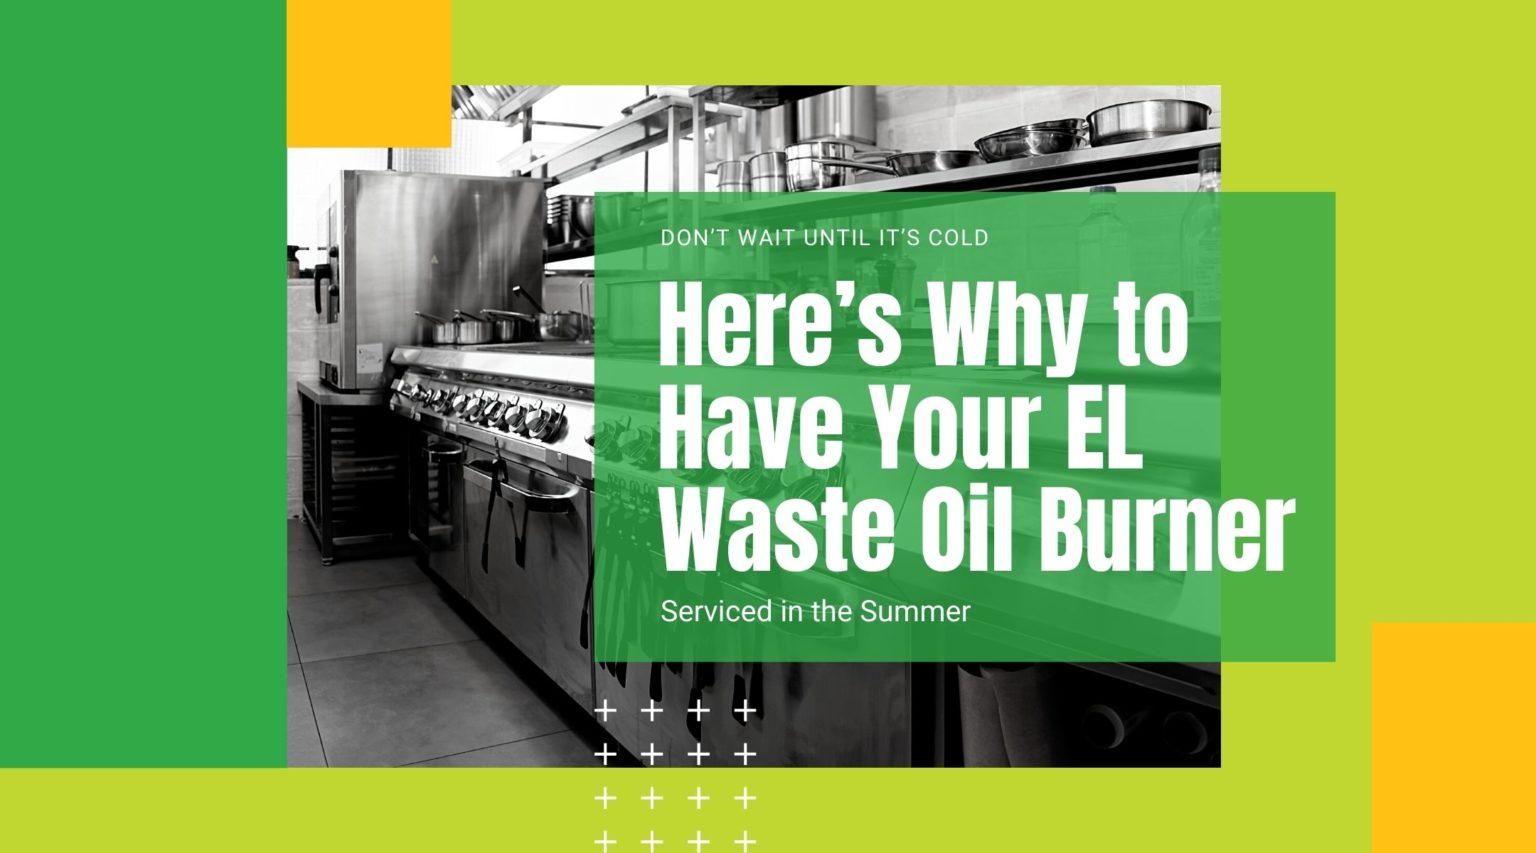 Don’t Wait Until It’s Cold – Here’s Why to Have Your EL Waste Oil Burner Serviced in the Summer